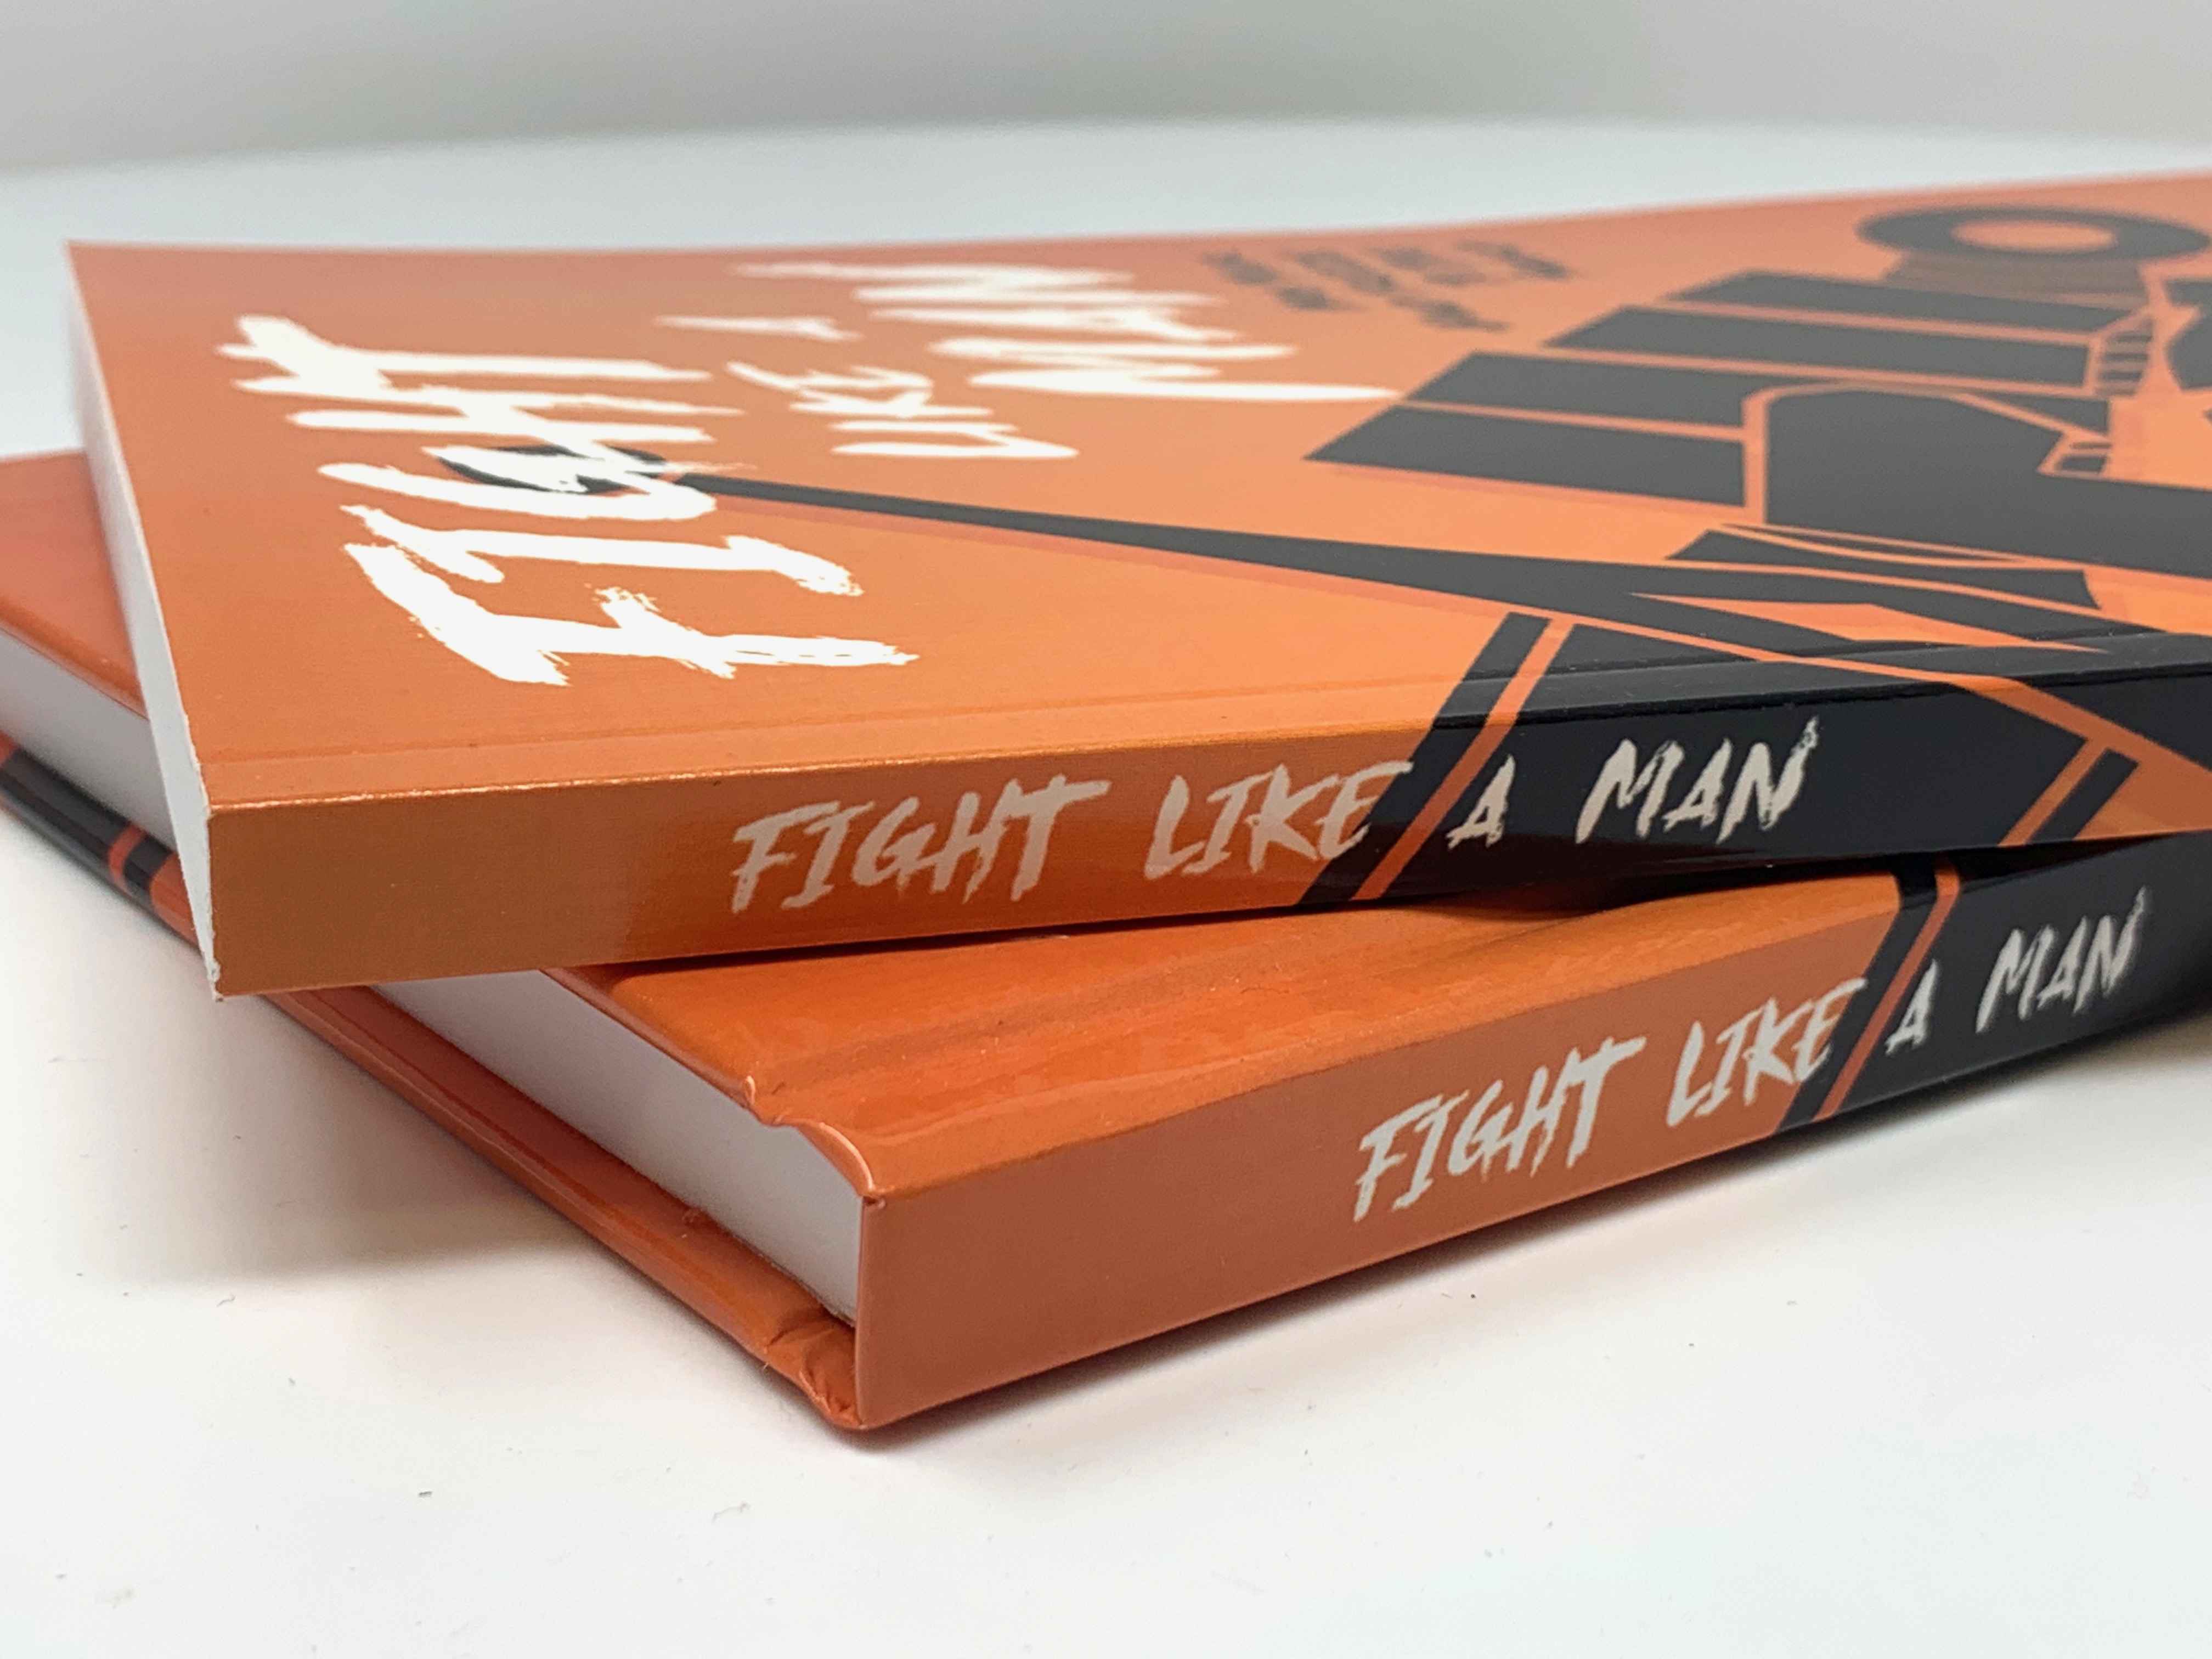 "Fight Like a Man" books in hardcover and paperback